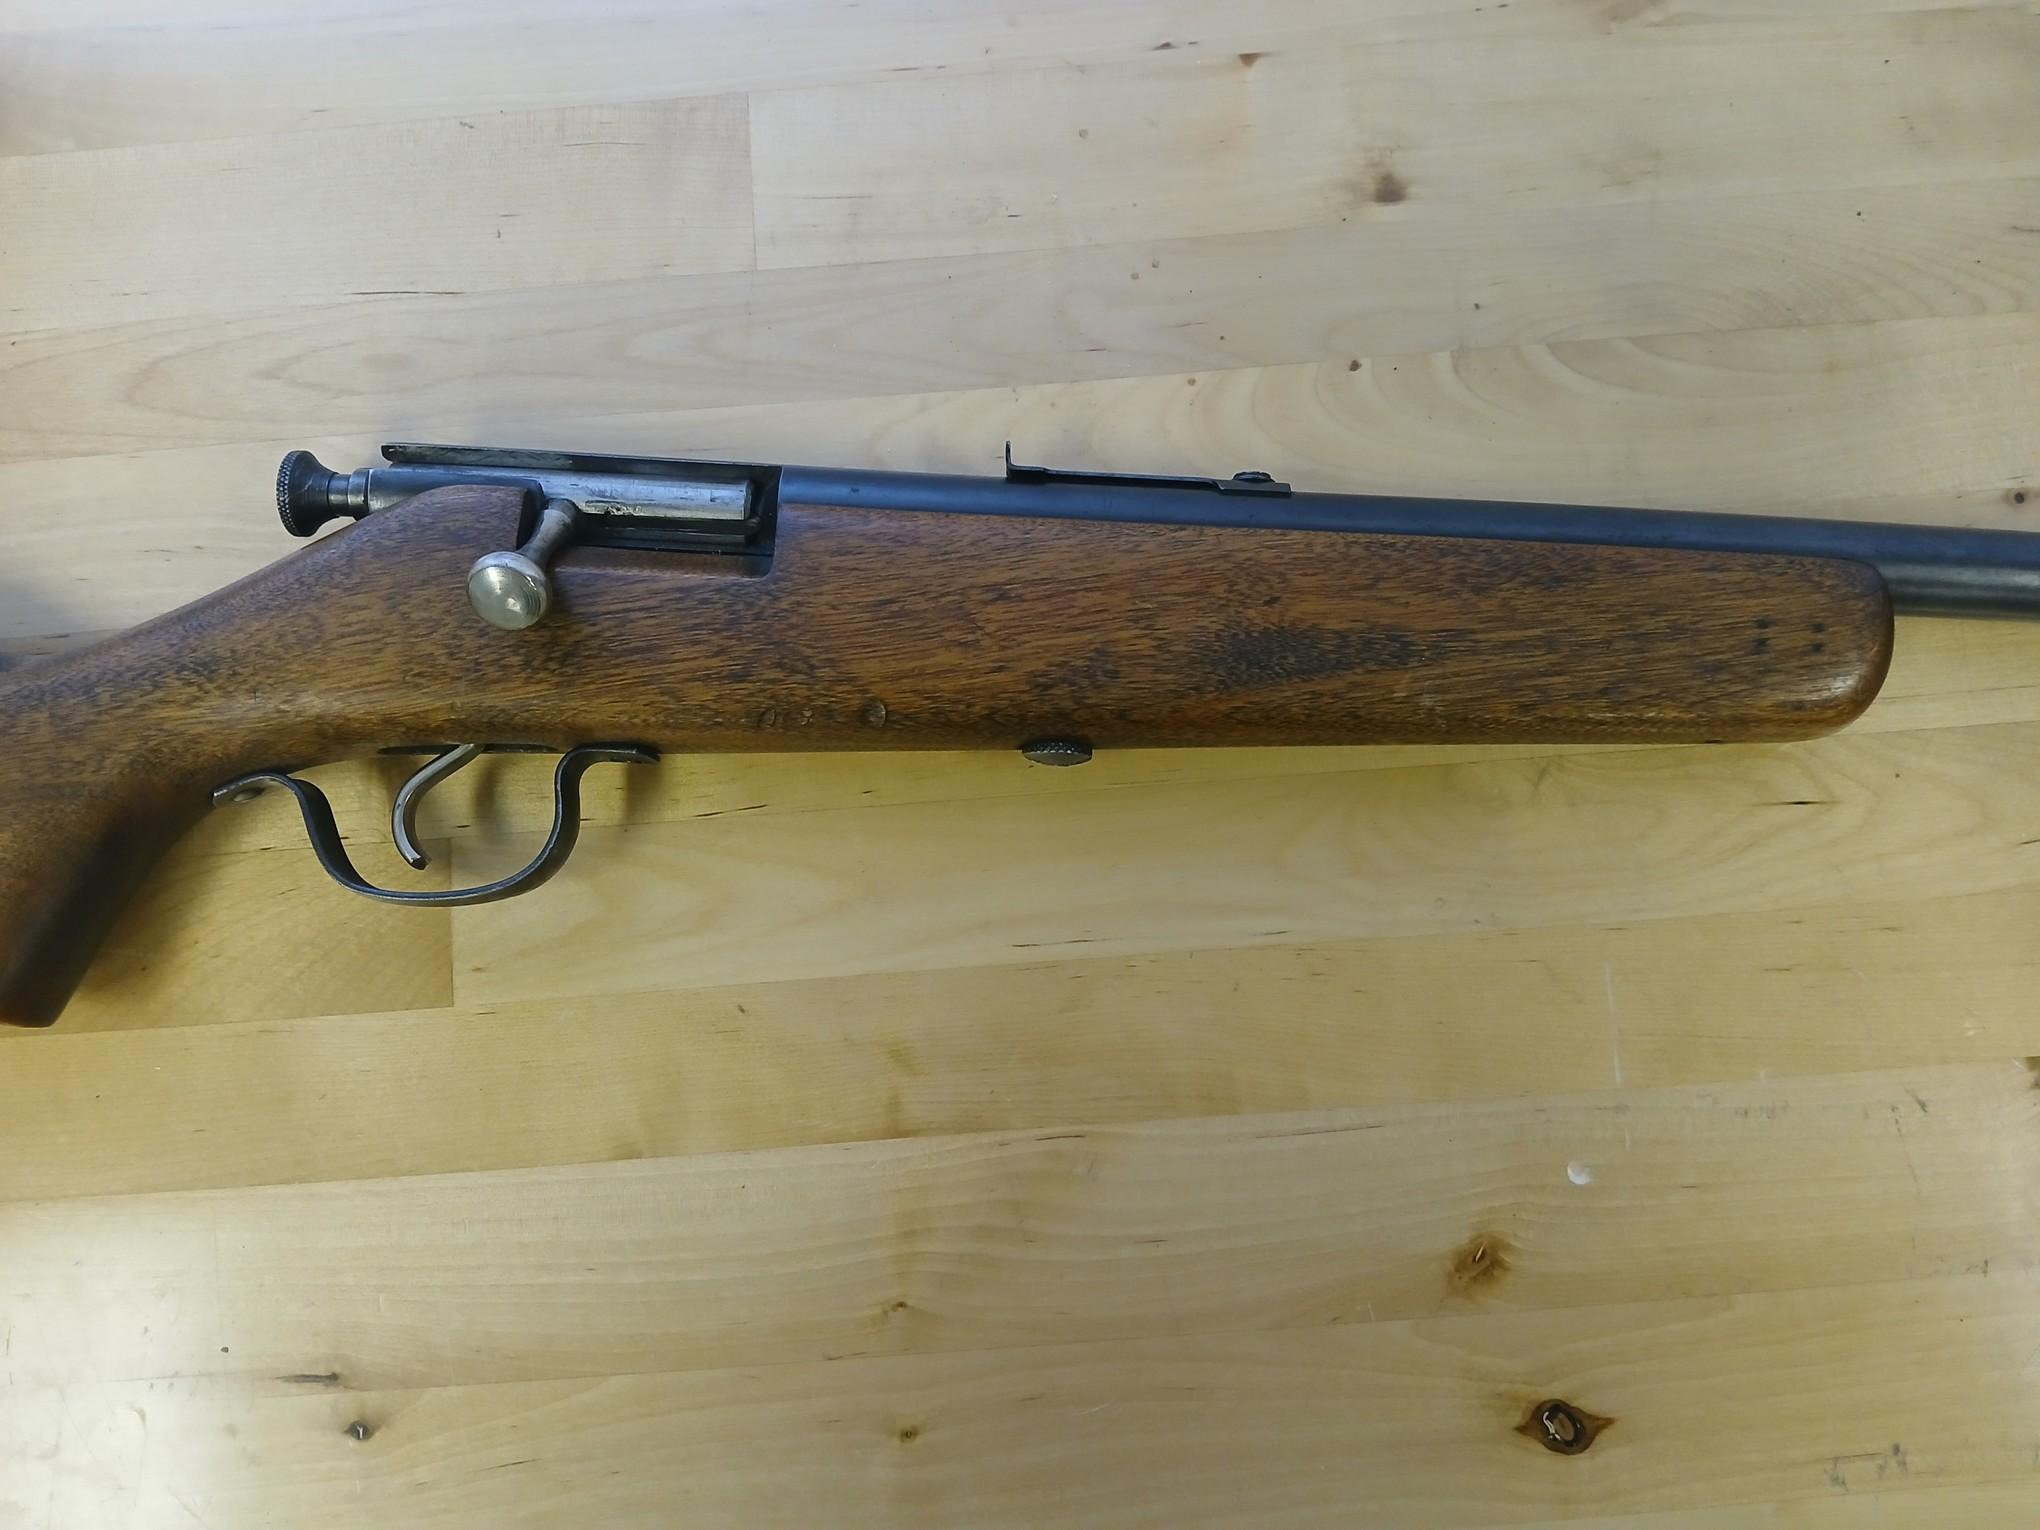 SPRINGFIELD Spring Action 22 Cal Rifle Model # 15 - Perfect Starter Rifle